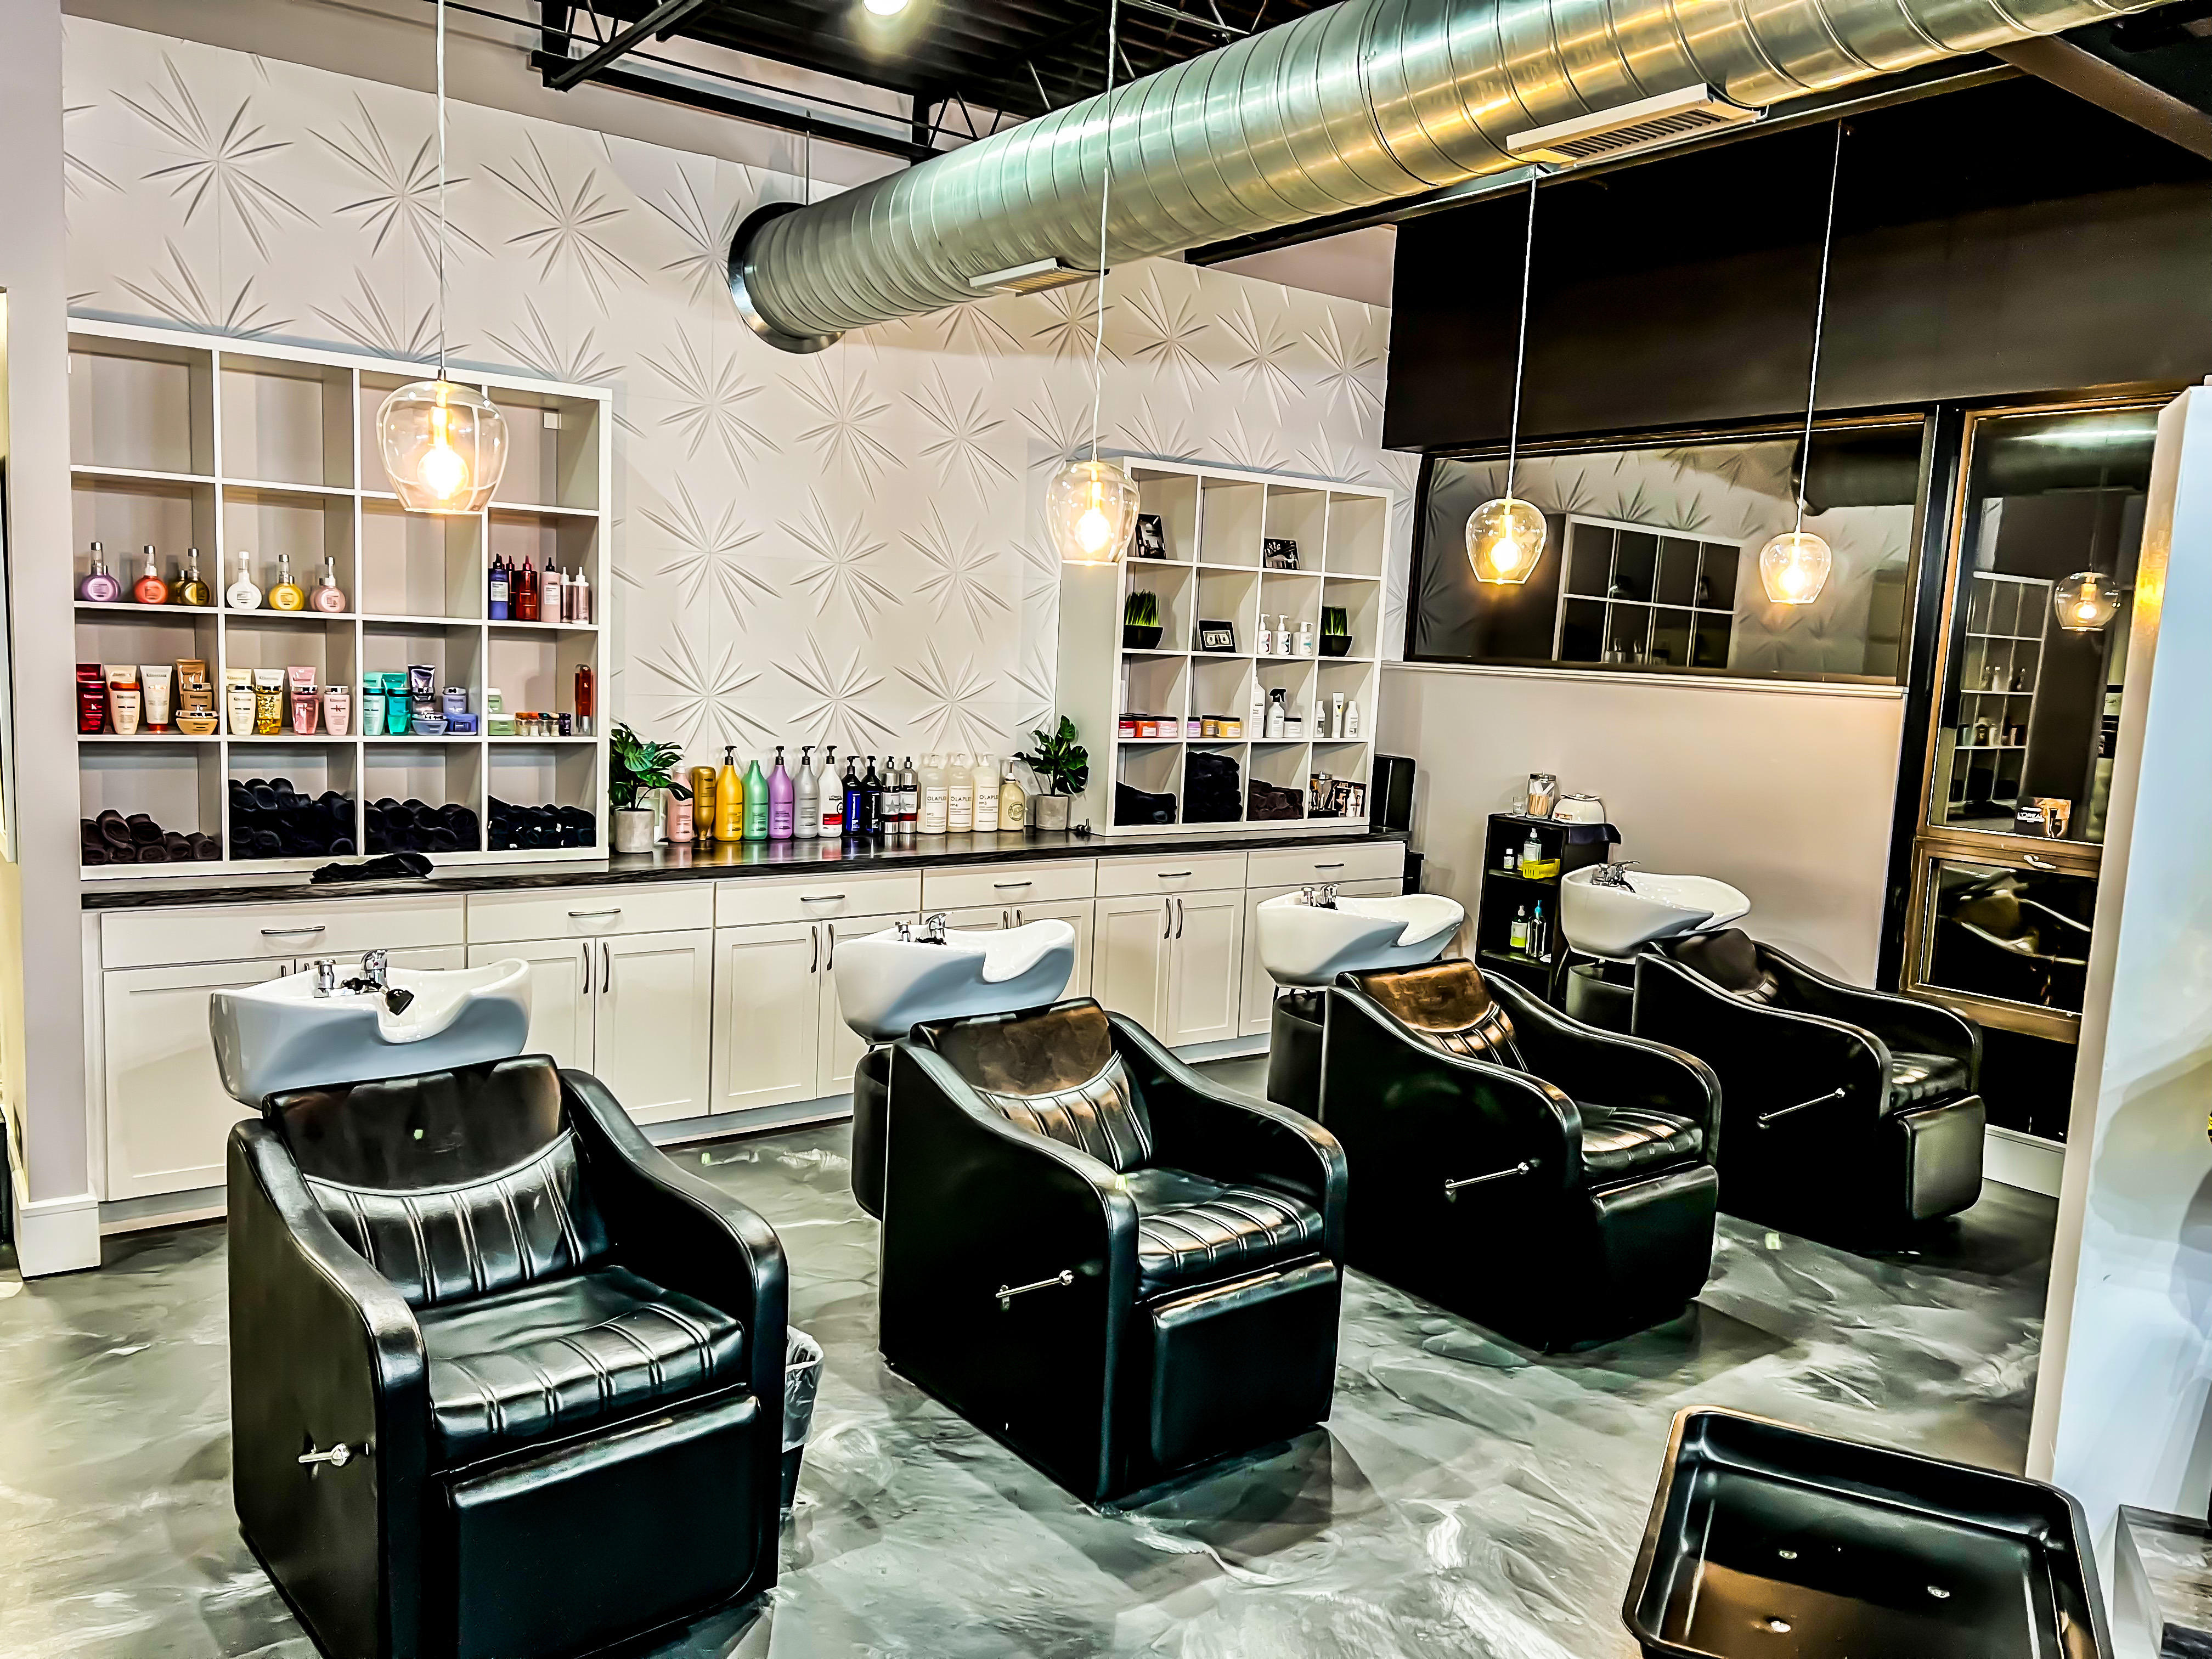 Offering a range of Hair Treatments & Product Brands to accommodate guests needs.